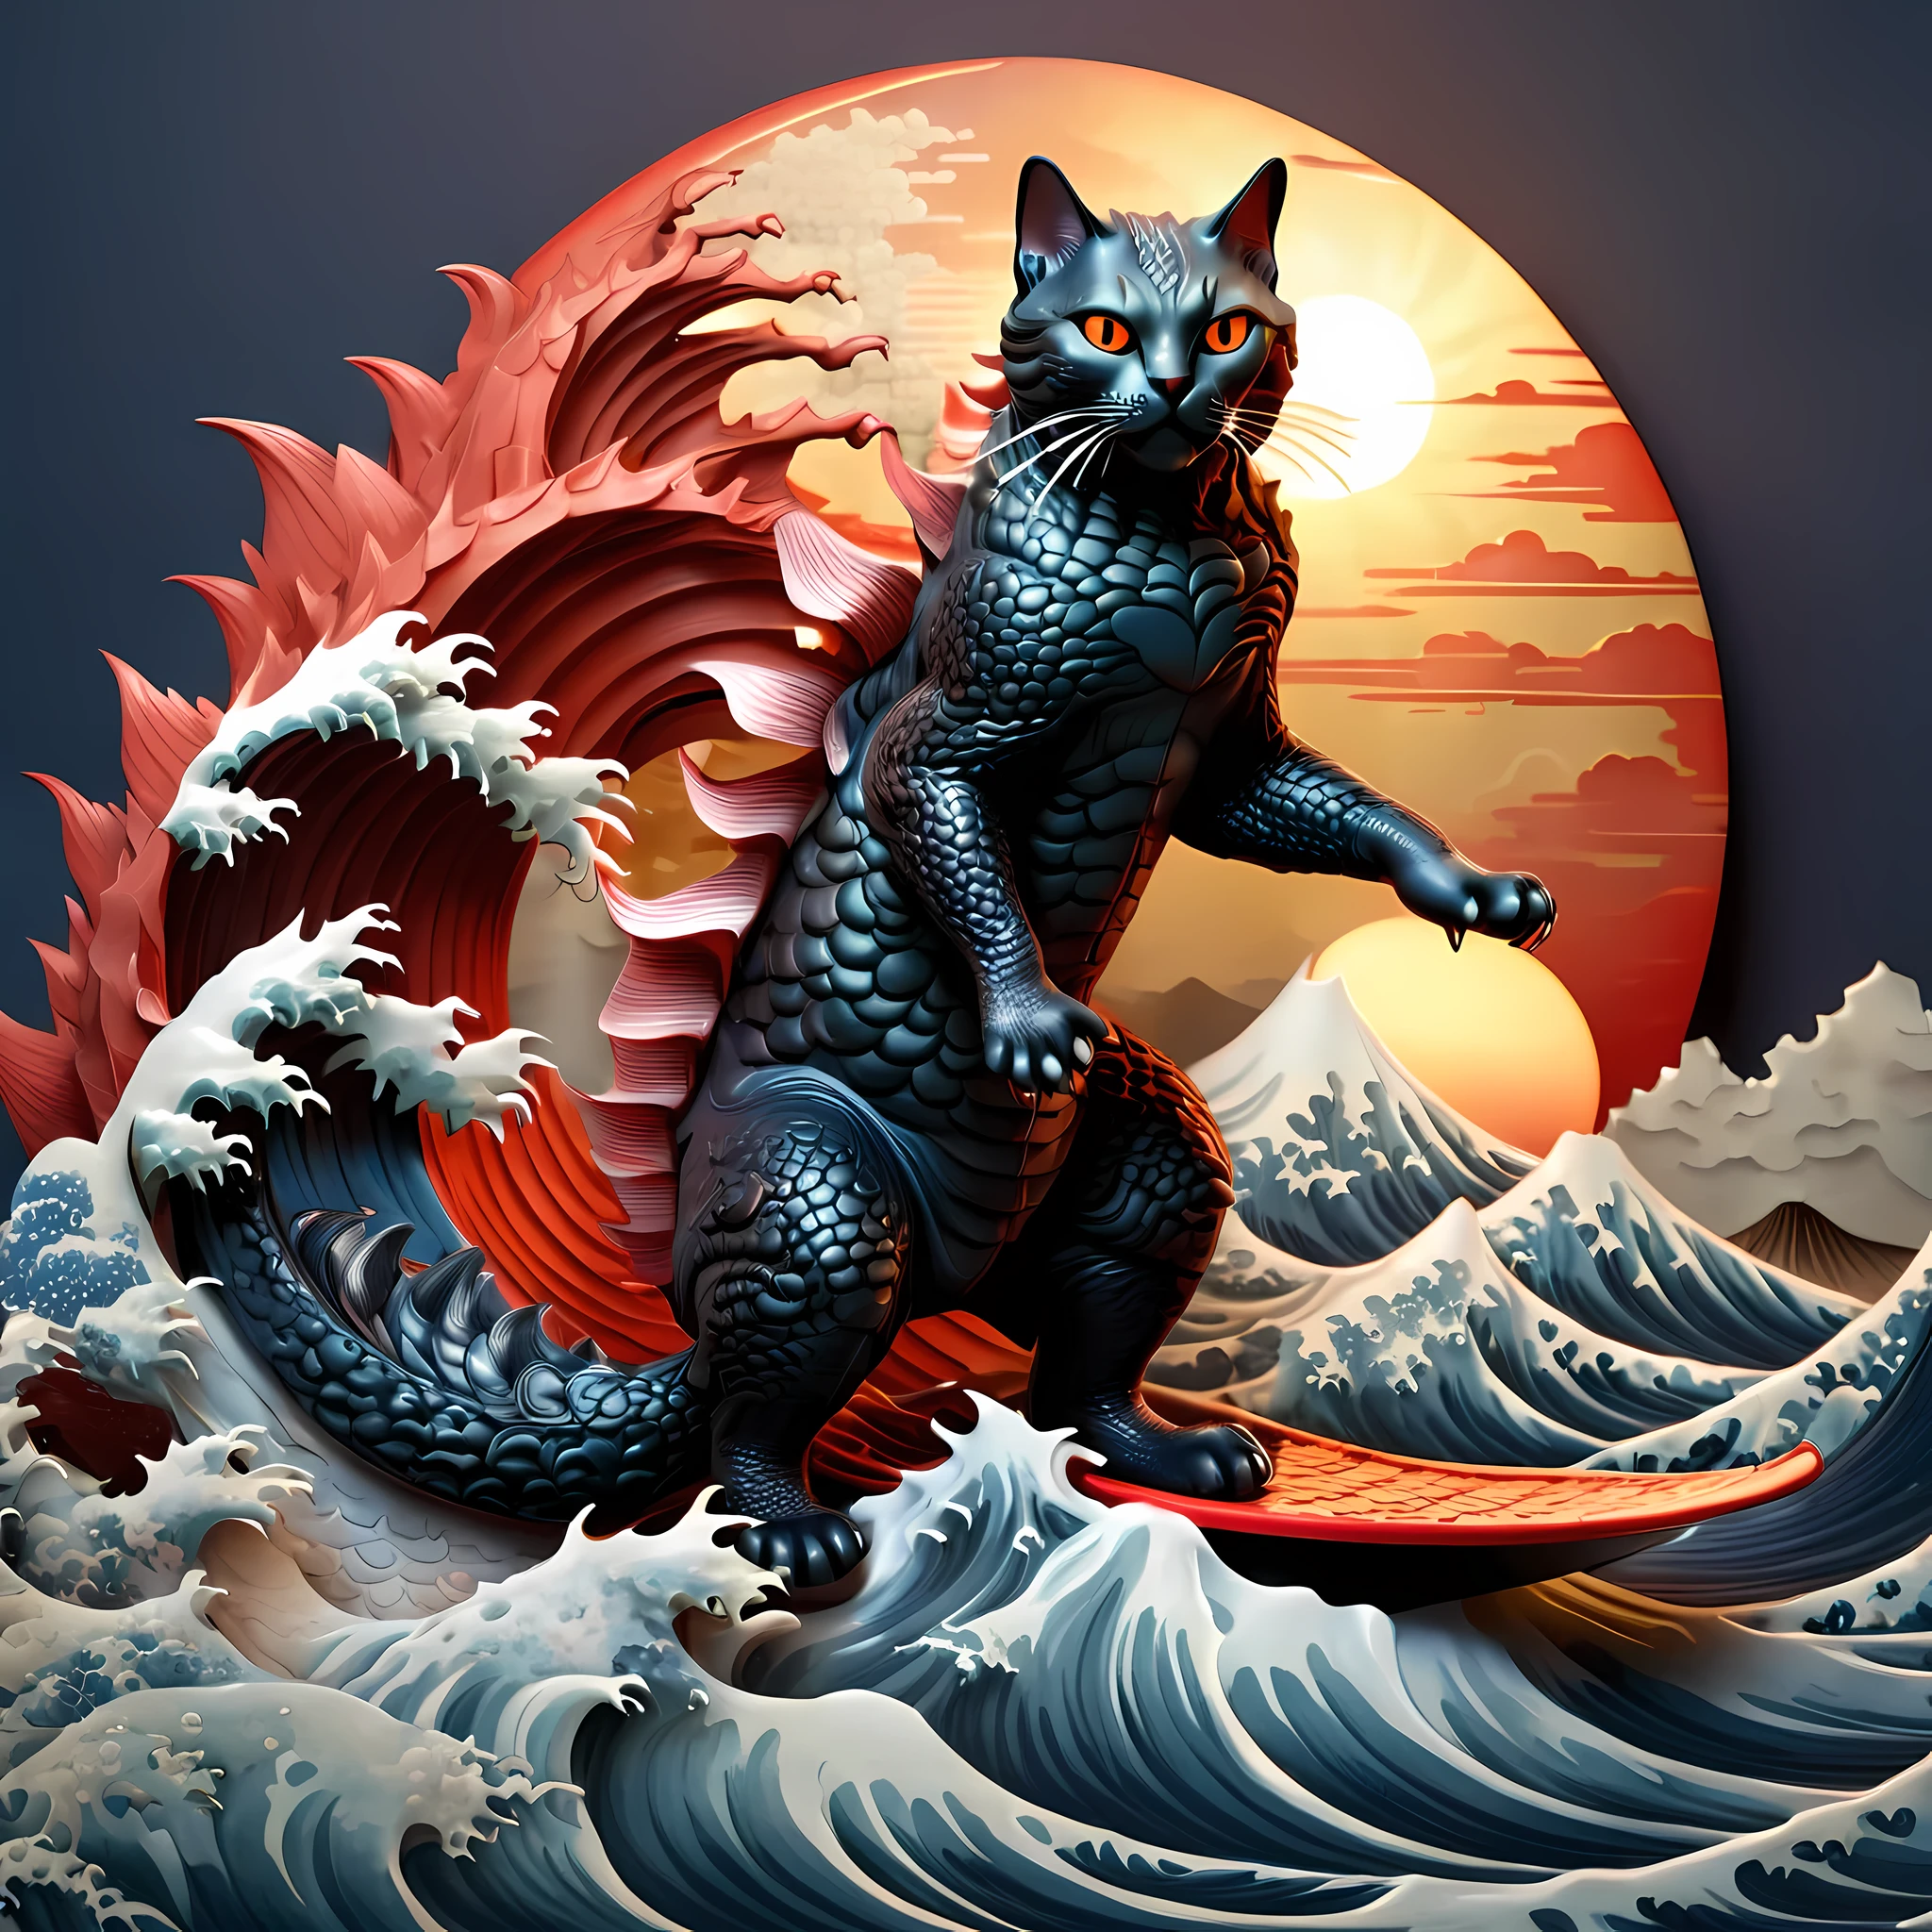 godzilla cat on a wave with a red sun in the background, cat attacking tokyo, inspired by Gatōken Shunshi, inspired by Utagawa Kuniyoshi, inspired by Koryusai Isoda, inspired by Yuko Shimizu, inspired by Utagawa Yoshitsuya, inspired by Tsukioka Yoshitoshi